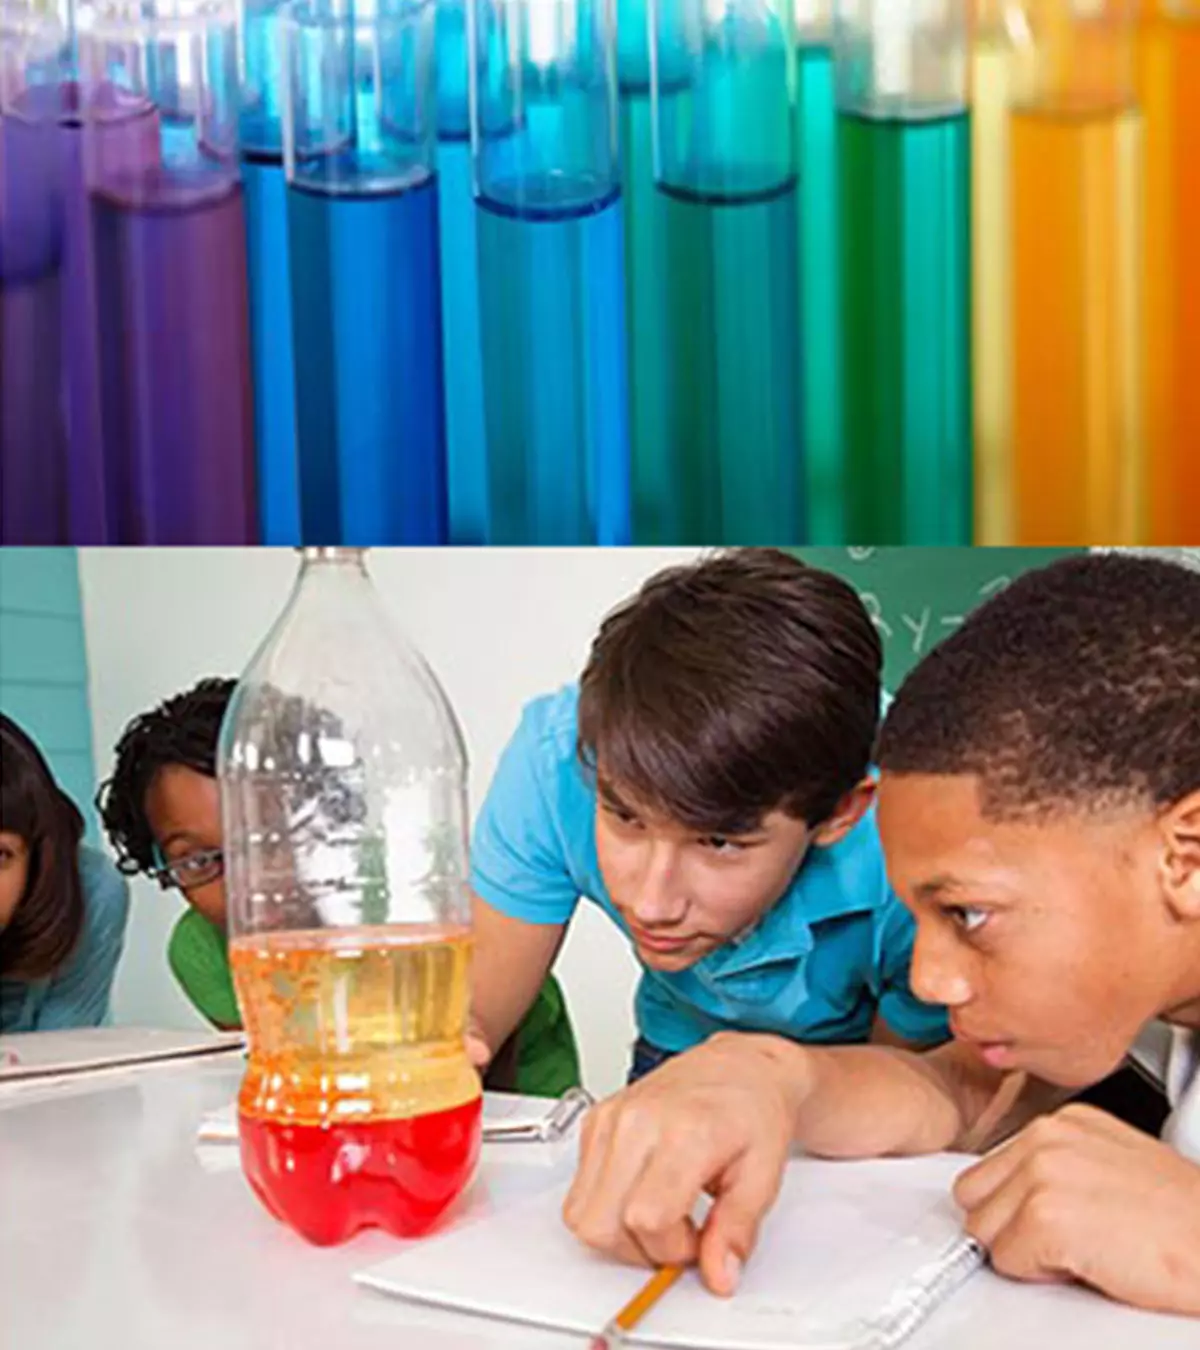 Simple science activities make learning a fun experience for preschoolers.